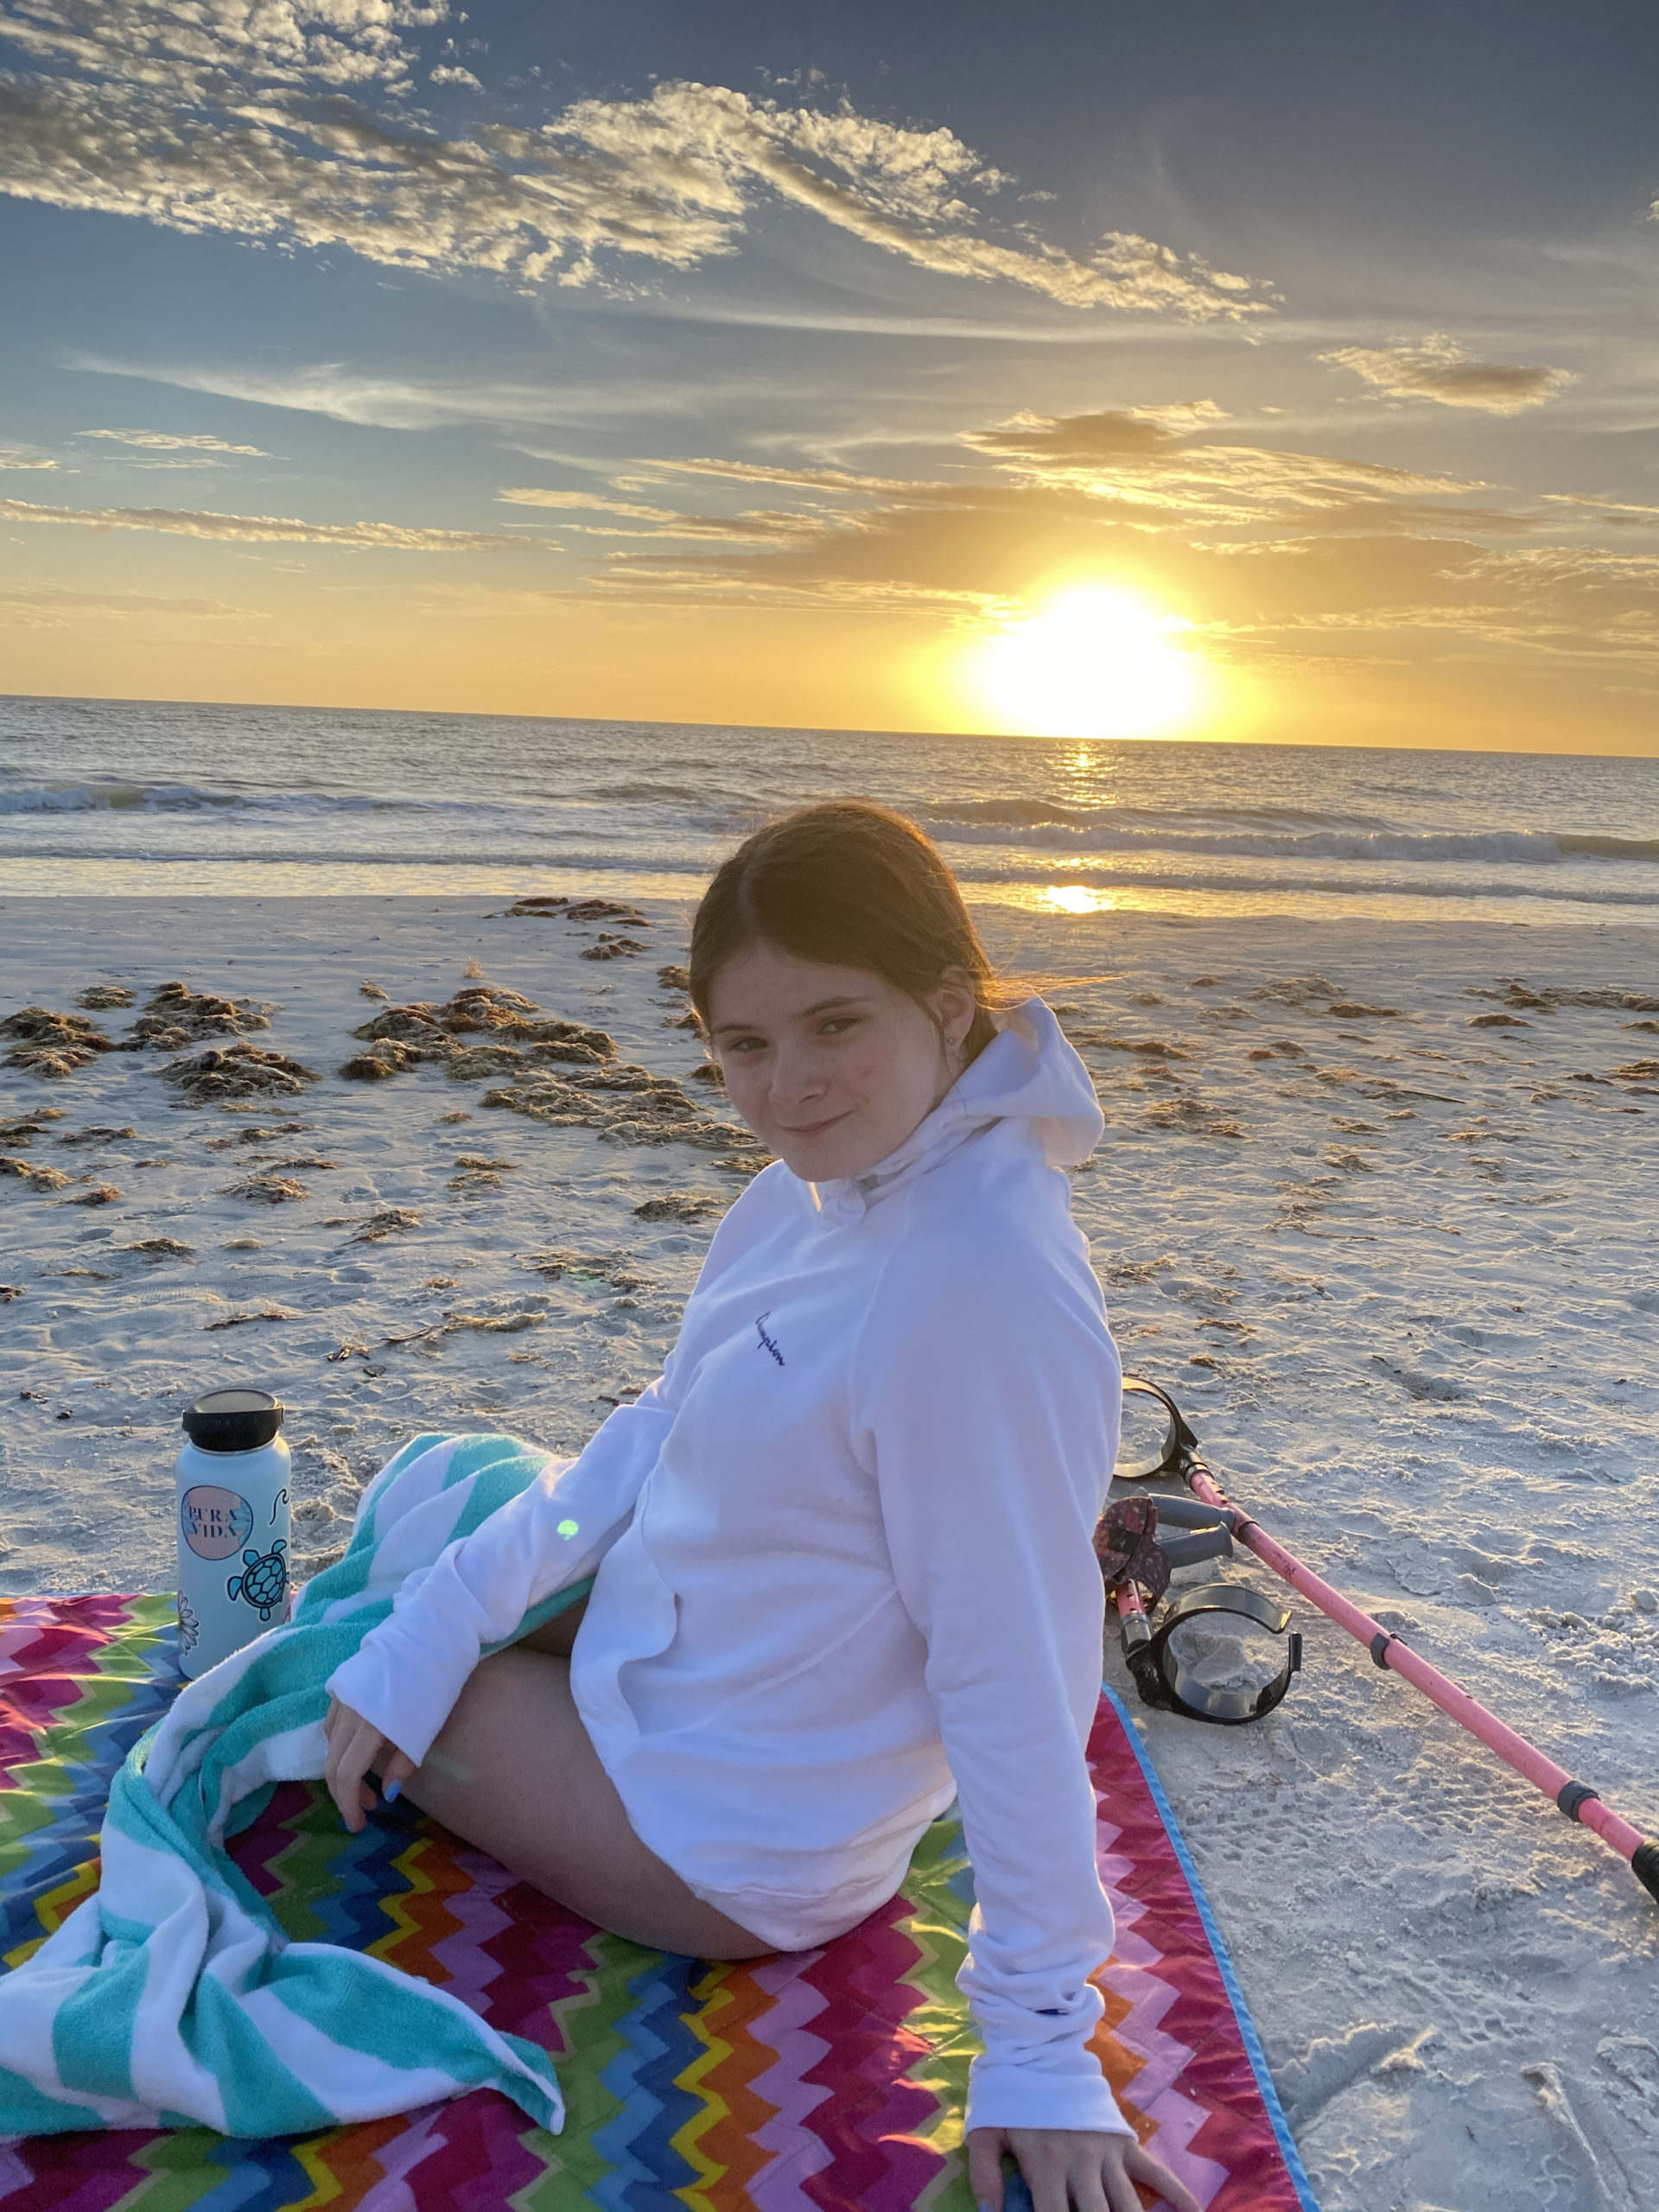 Female sitting on a beach towel at the beach turned around smiling at the camera with sunrise in the background